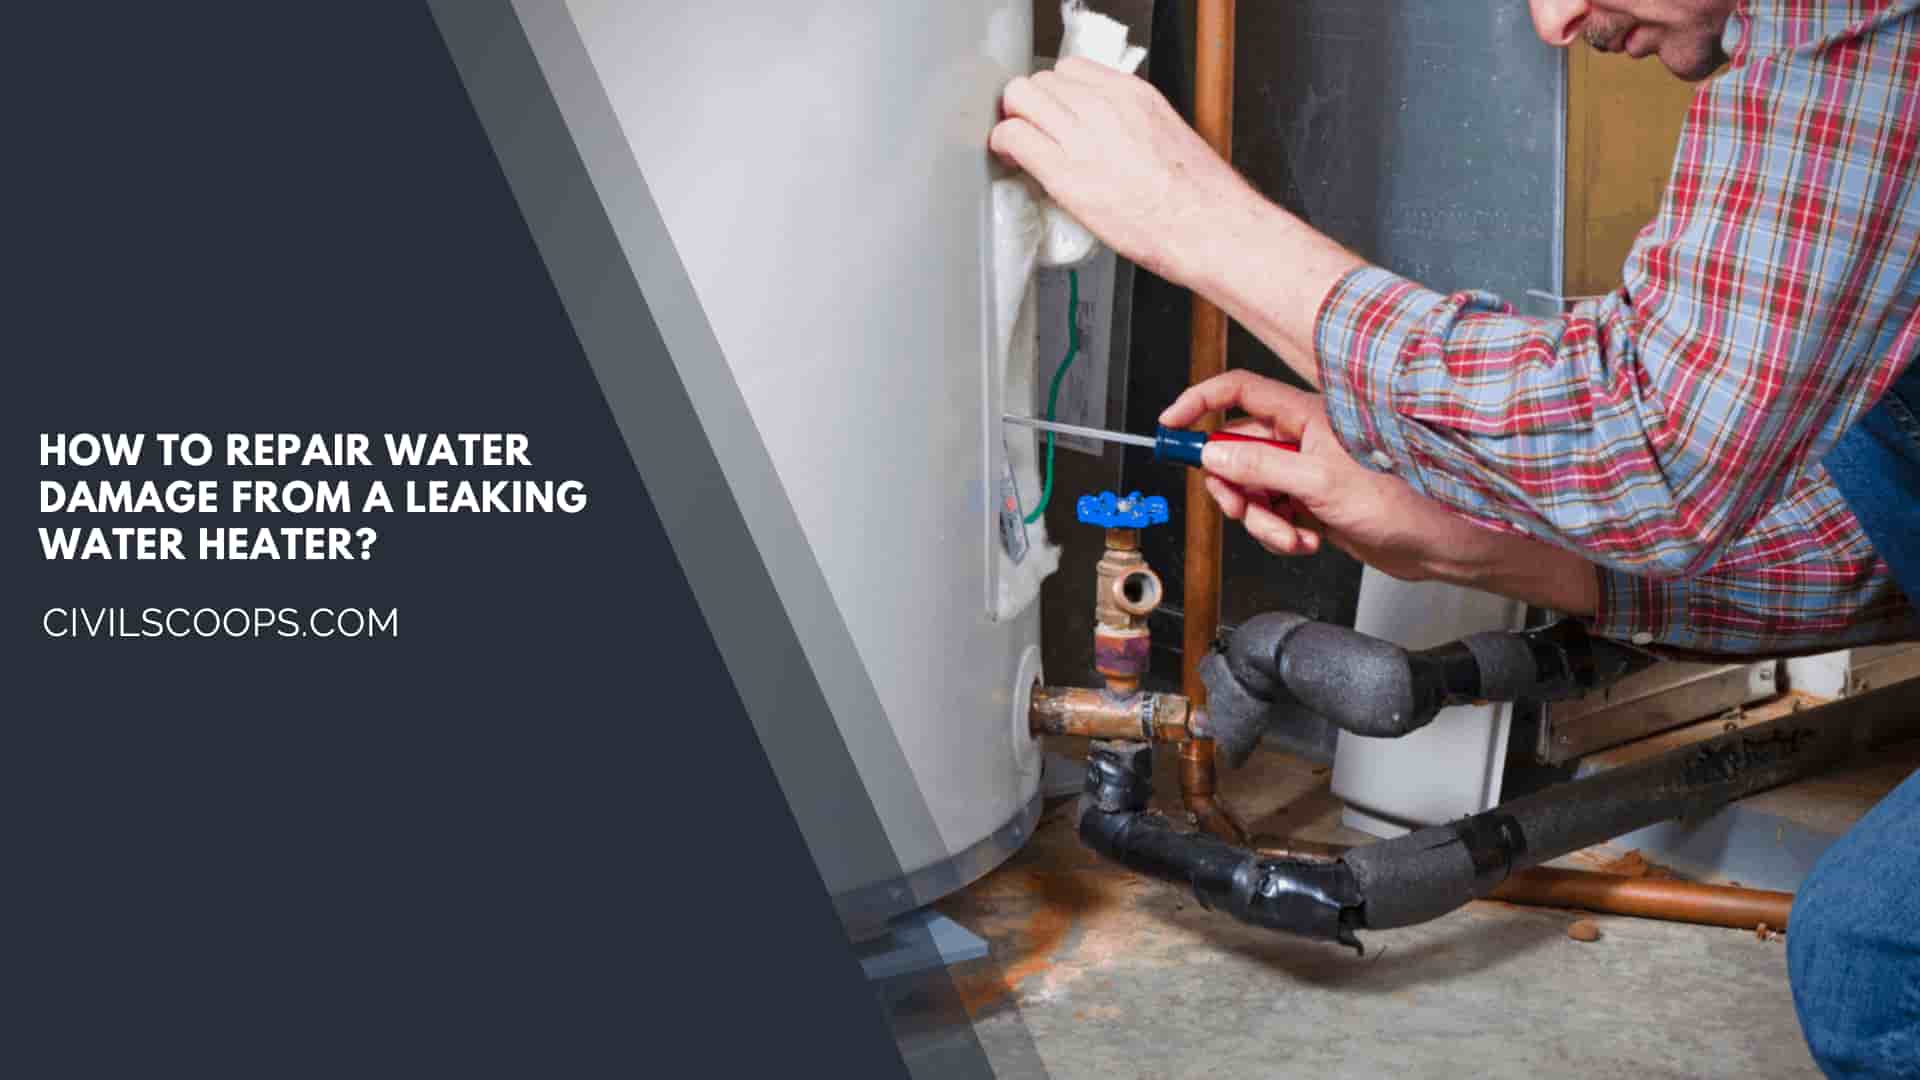 How to Repair Water Damage from a Leaking Water Heater?